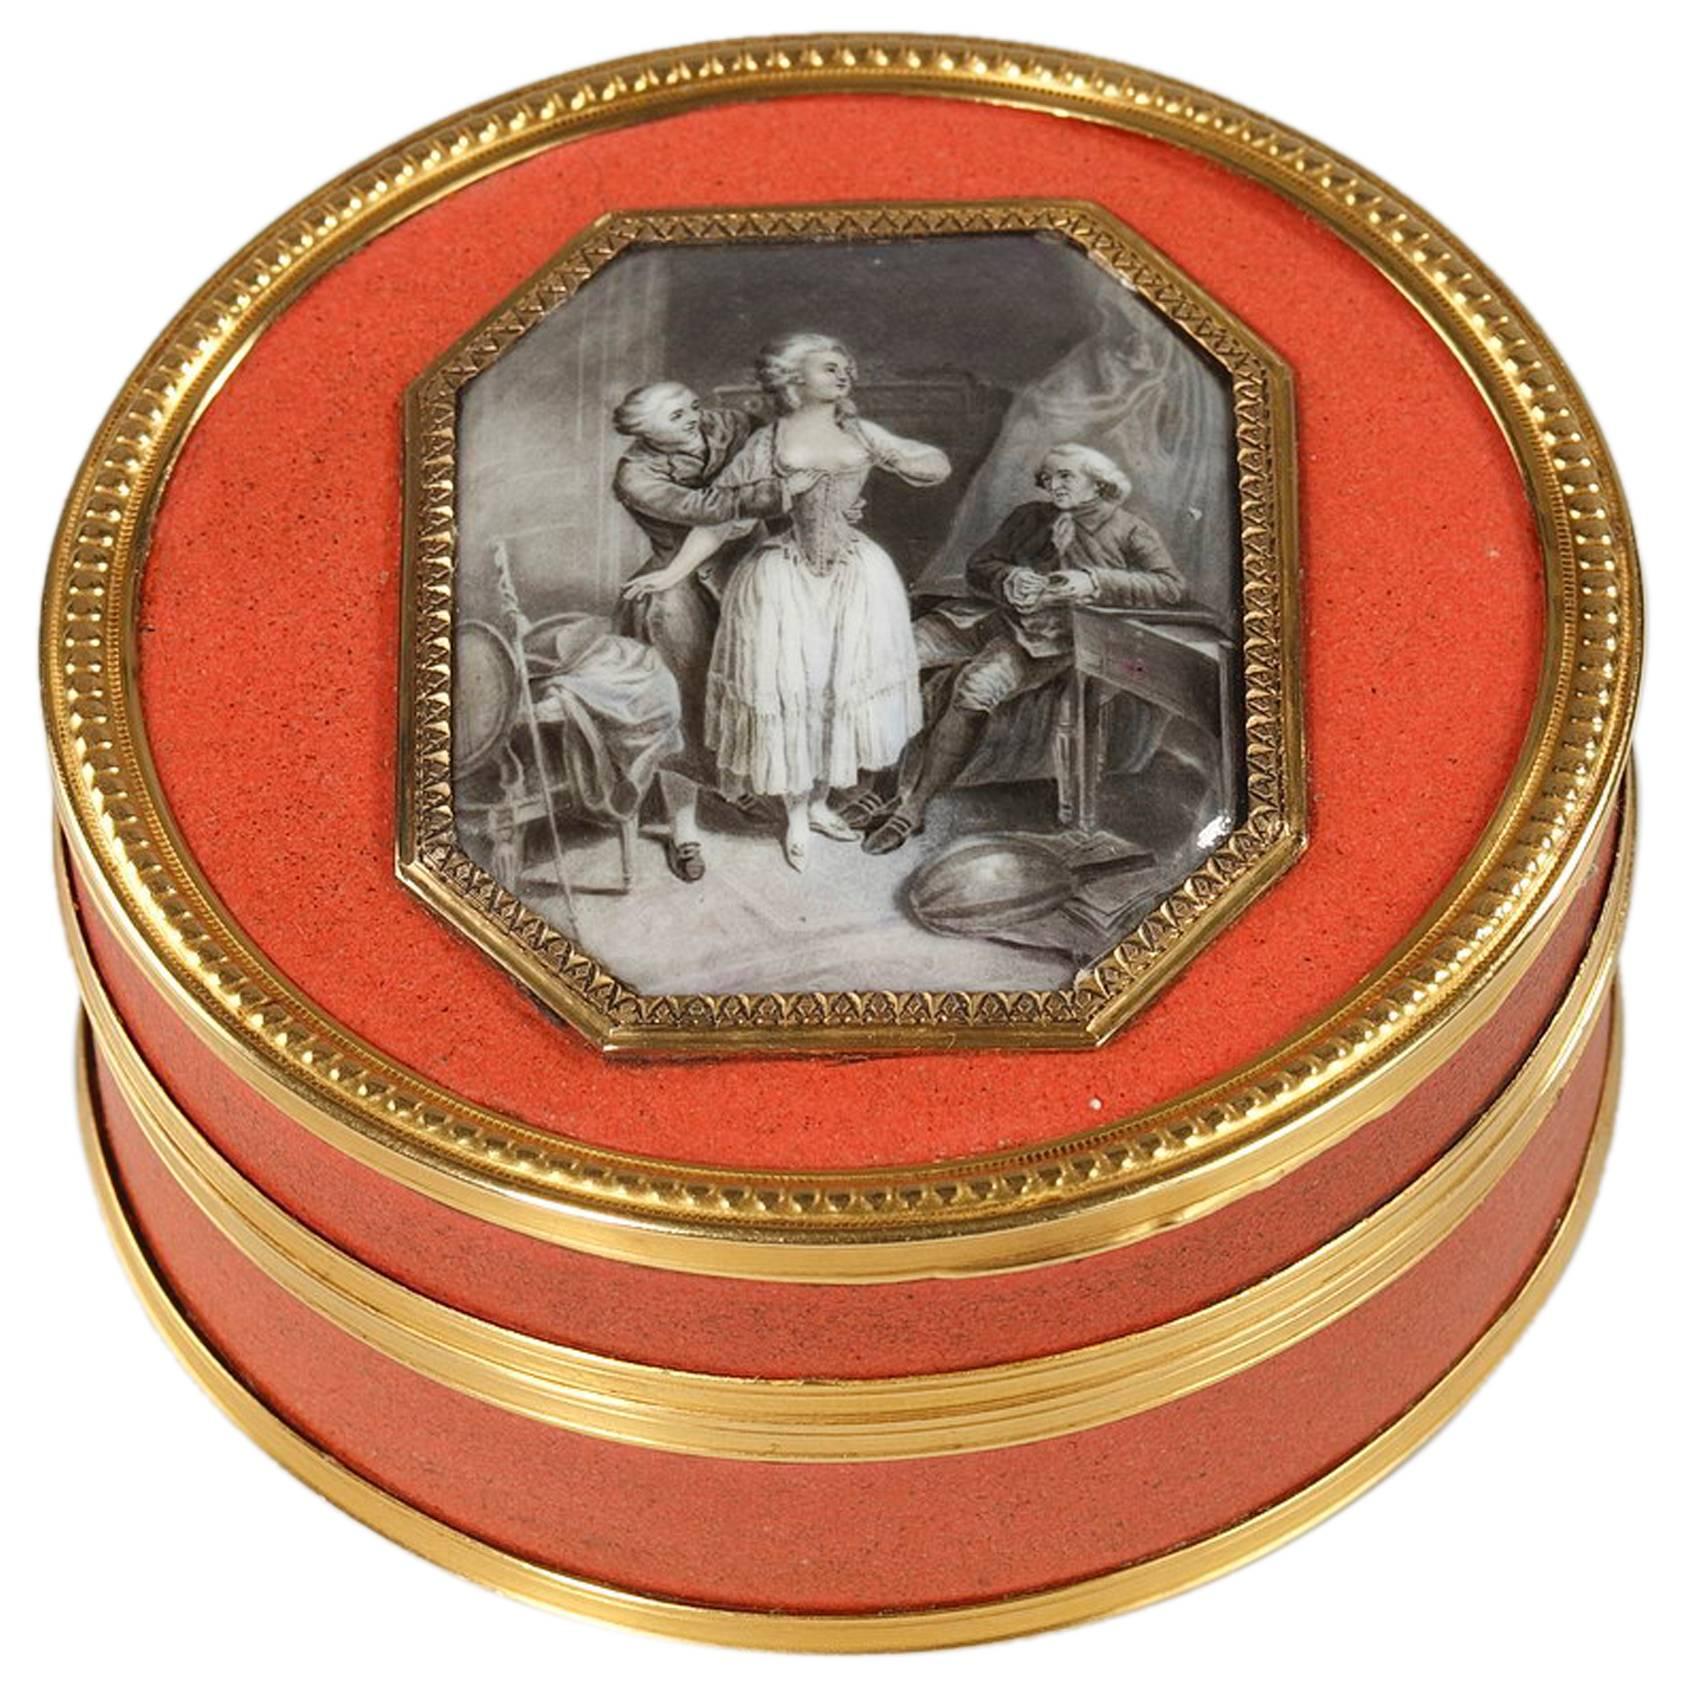 Lacquer Box with Erotic Enamel Medallion, Late 18th Century